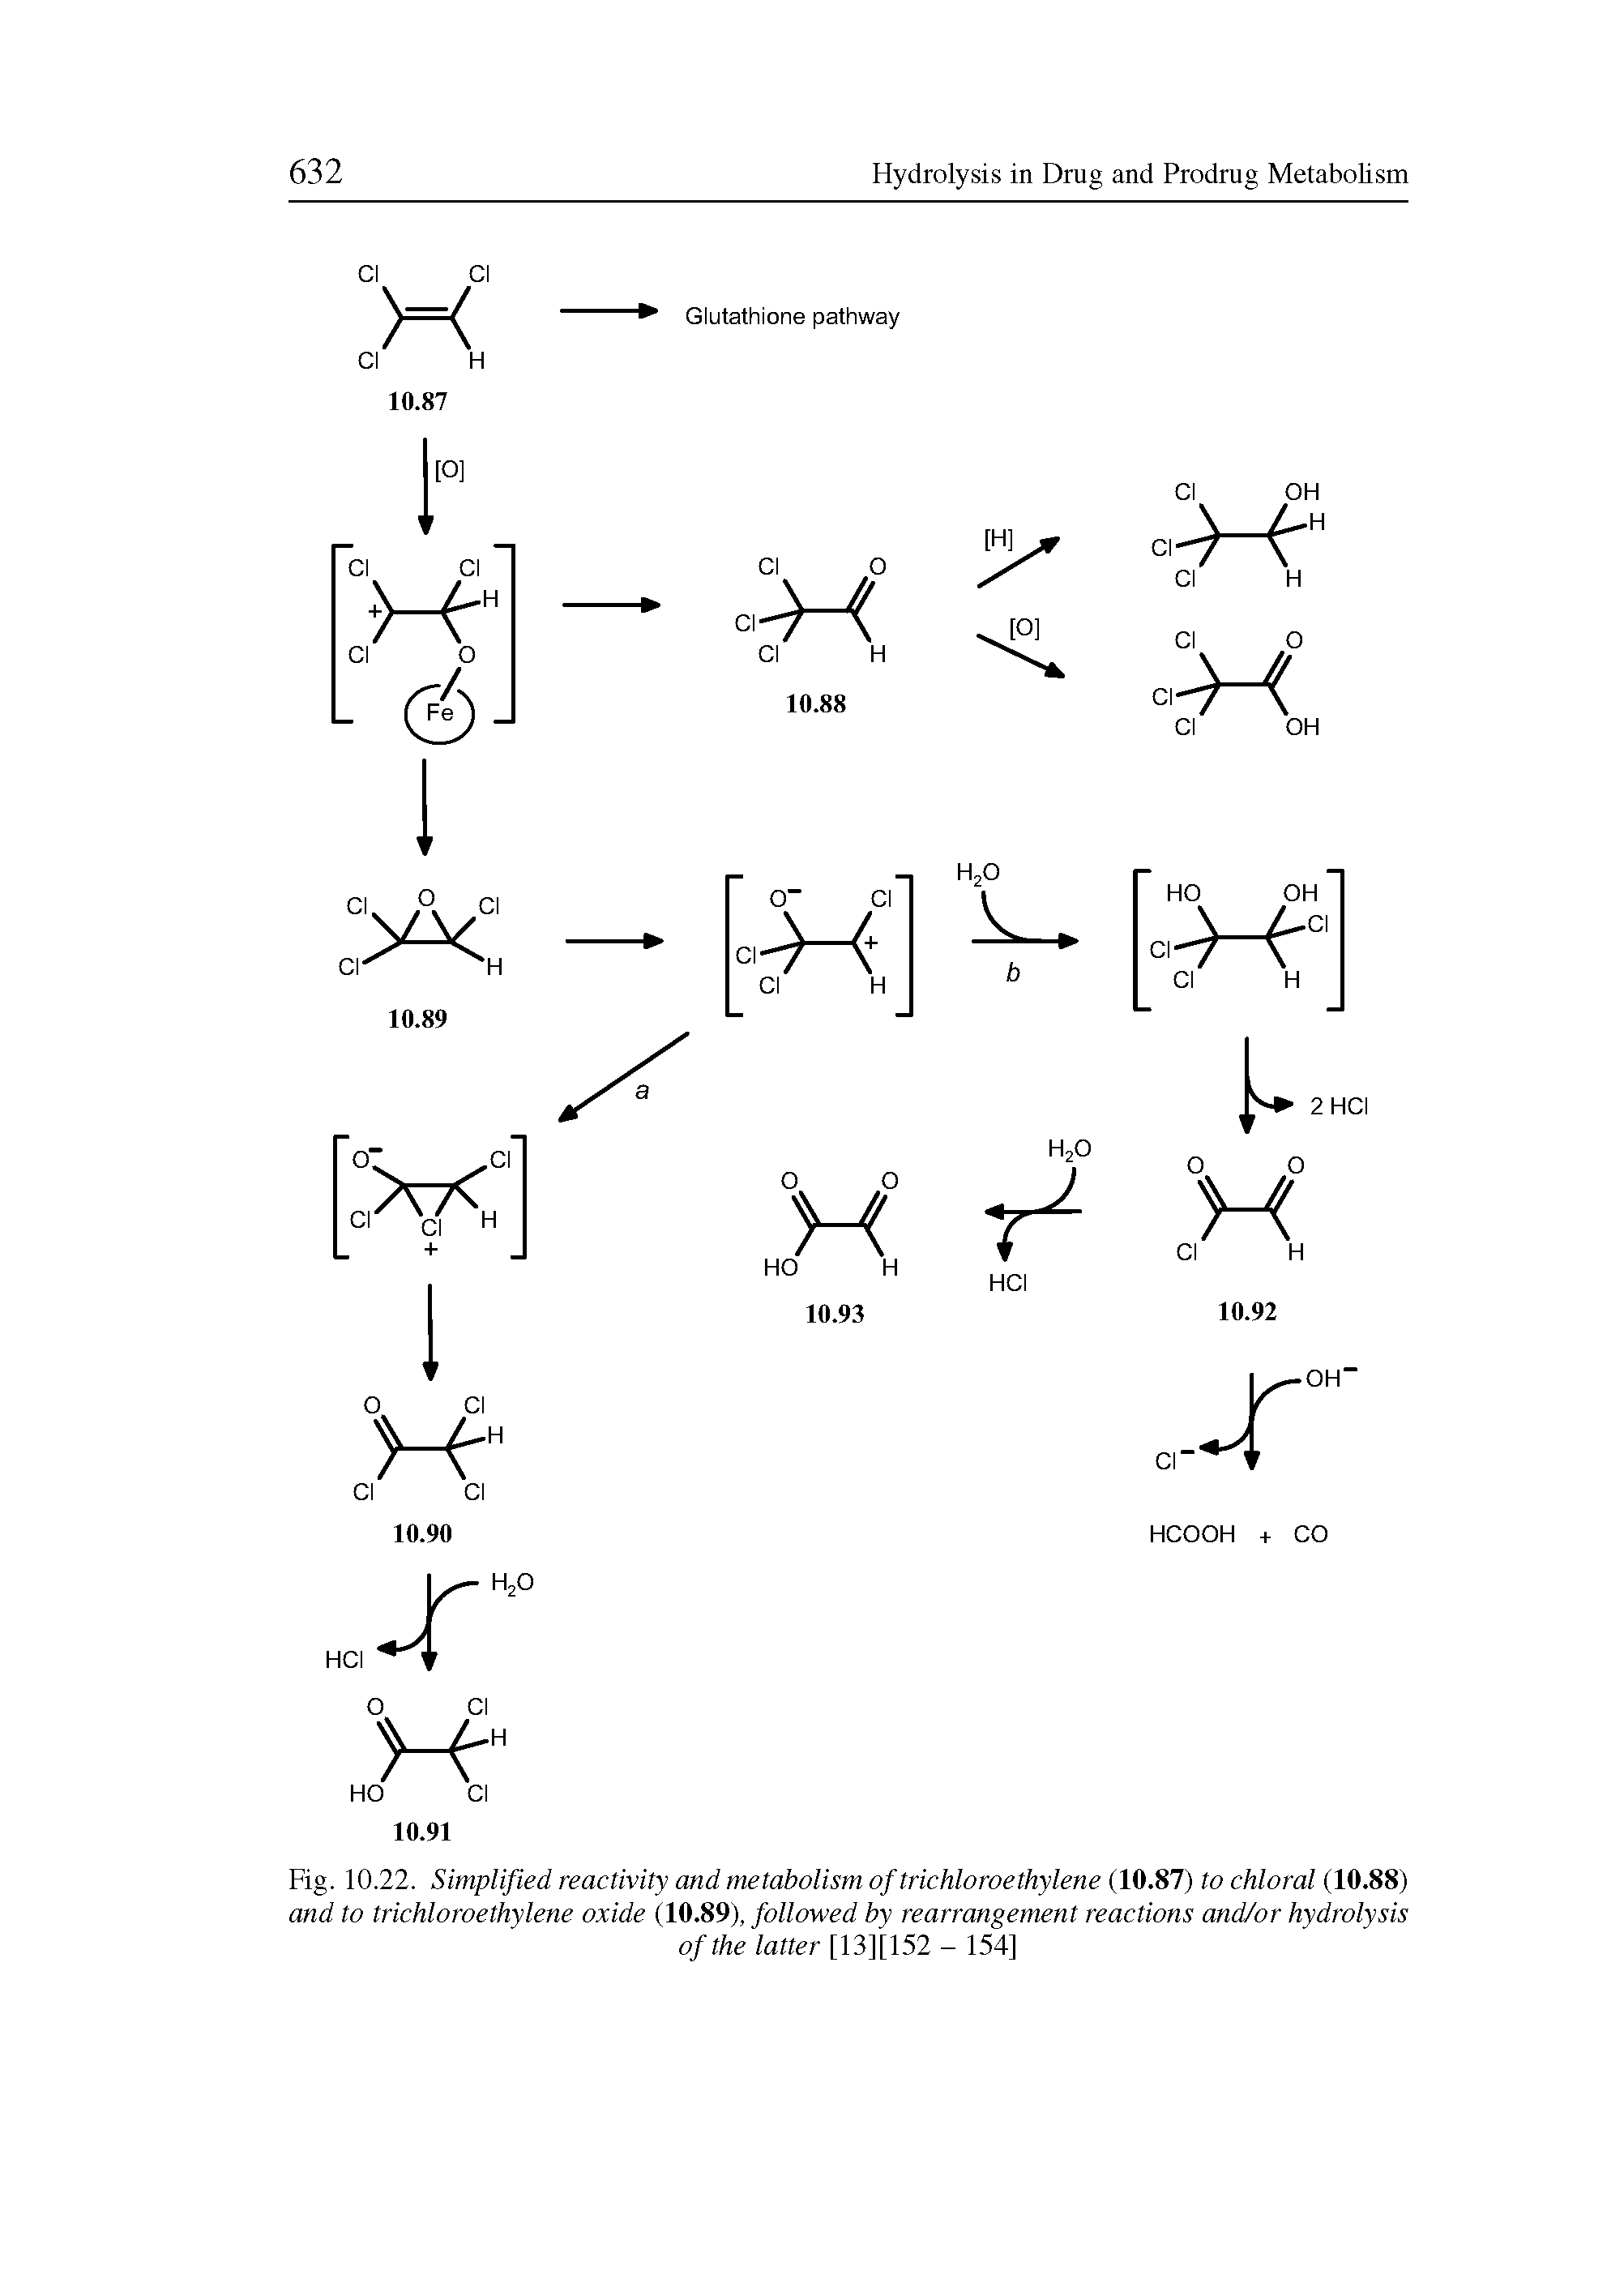 Fig. 10.22. Simplified reactivity and metabolism of trichloroethylene (10.87) to chloral (10.88) and to trichloroethylene oxide (10.89), followed by rearrangement reactions and/or hydrolysis...